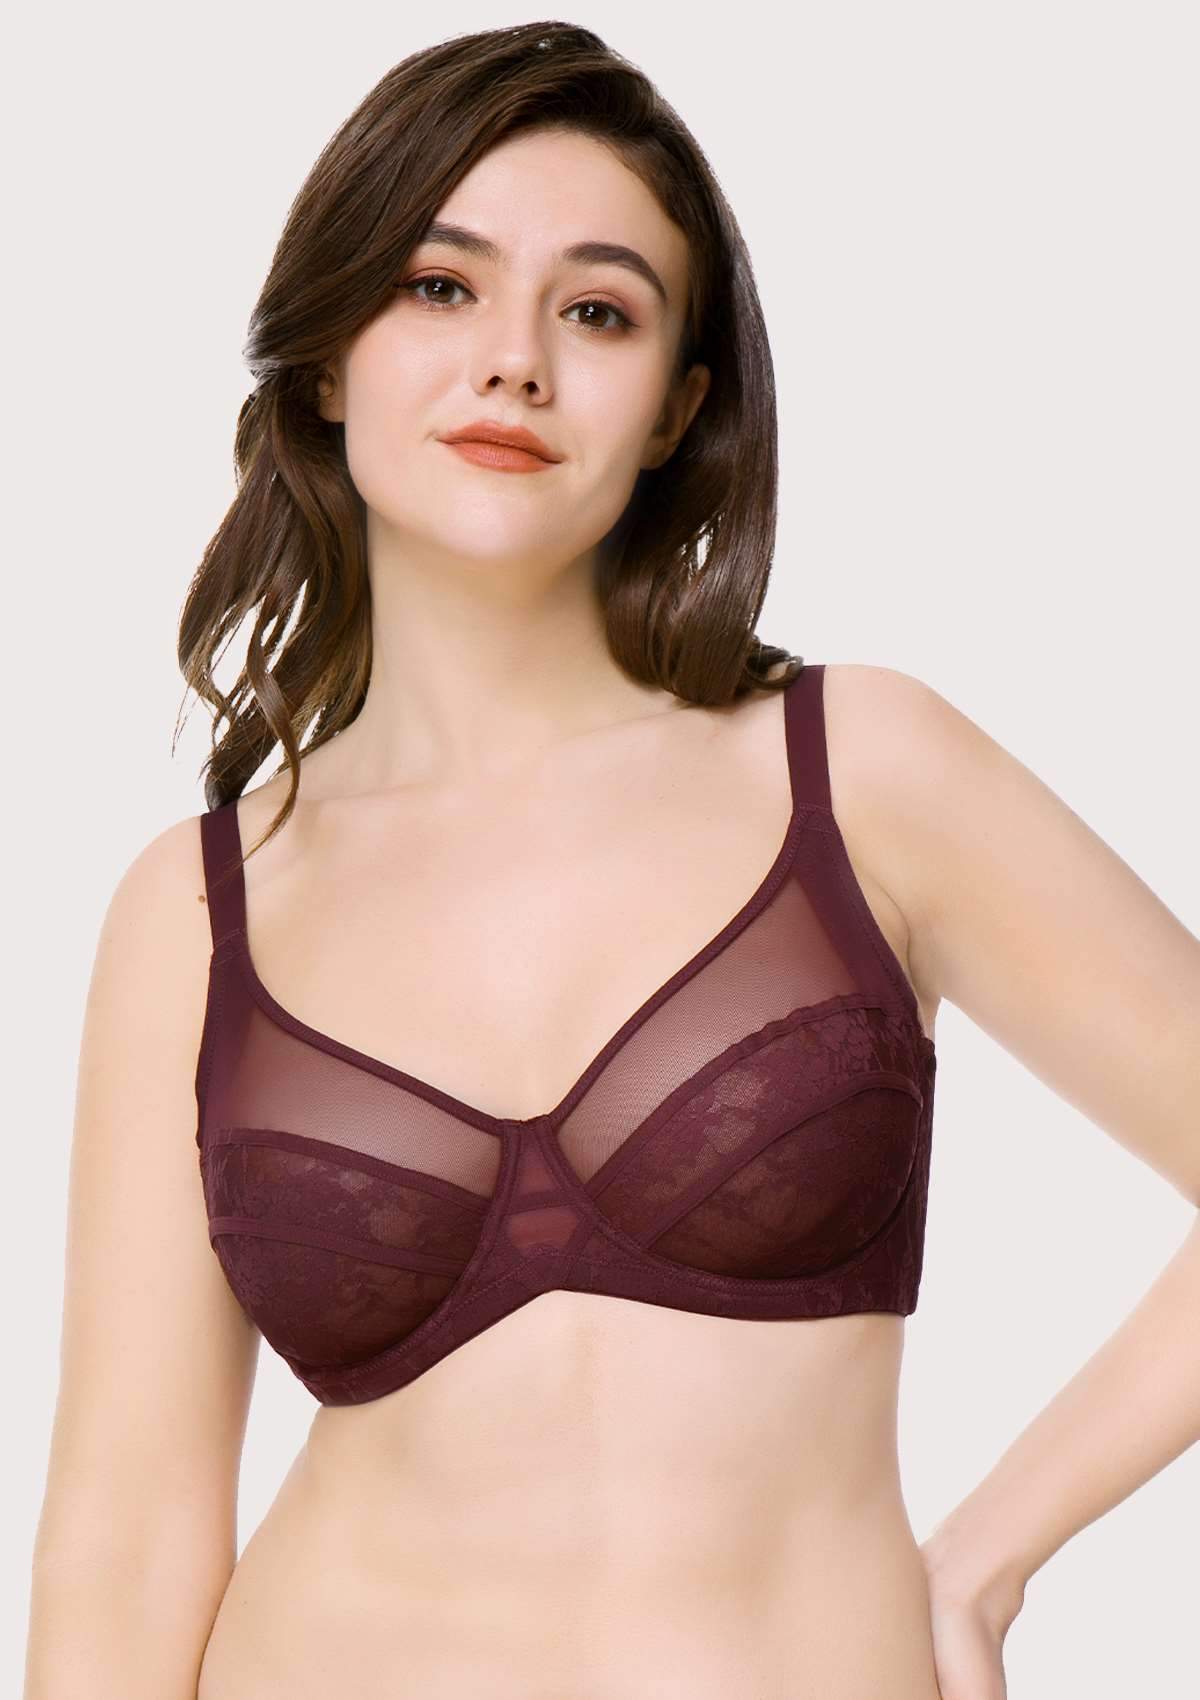 How to Choose the Right Size Bra and Style - Vstar